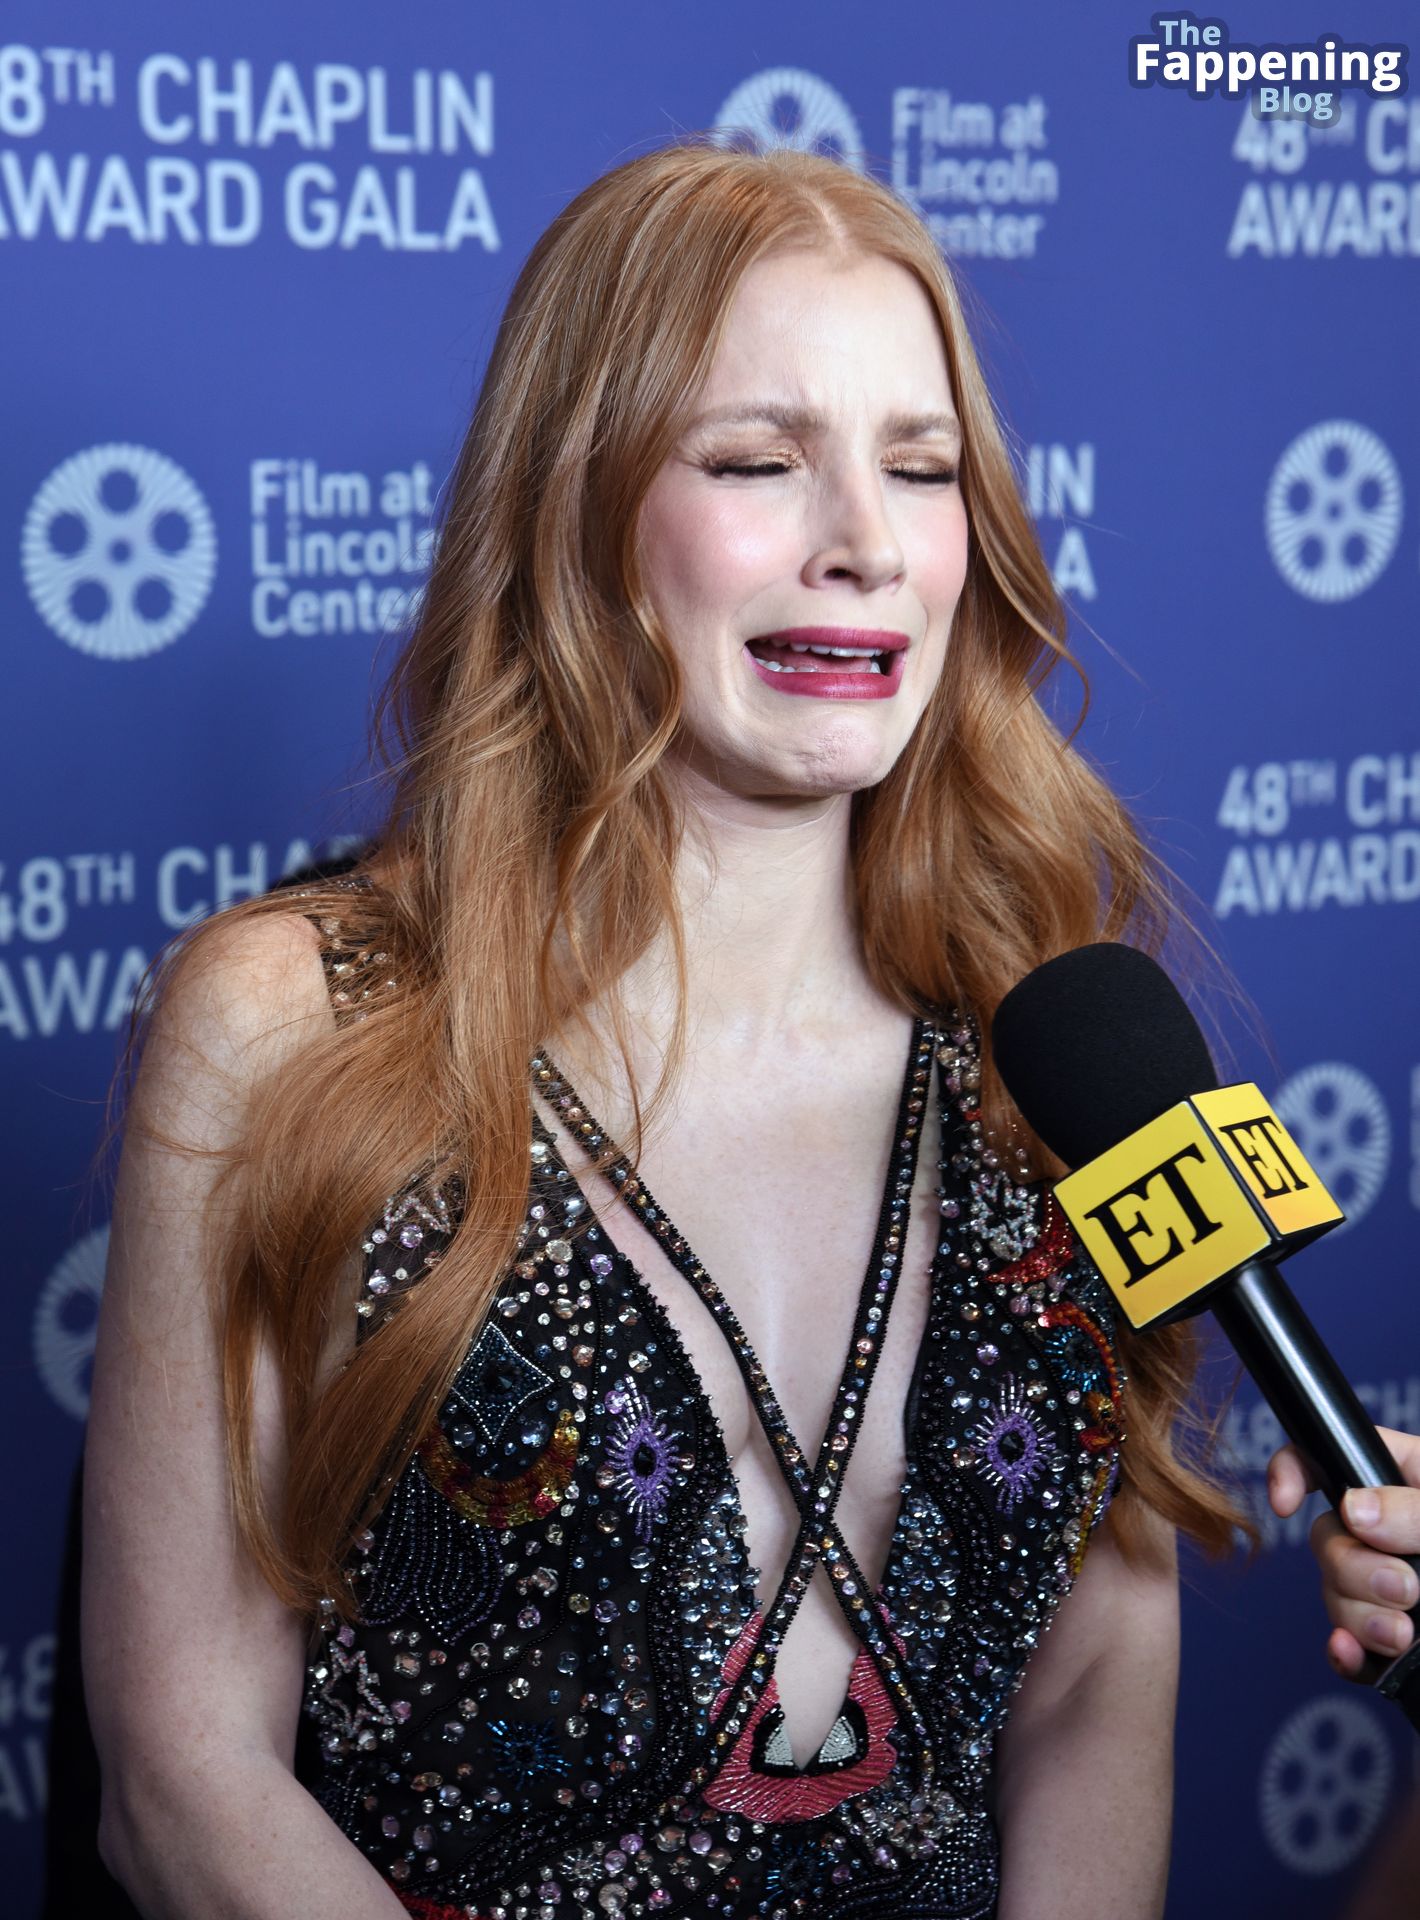 Jessica-Chastain-Sexy-The-Fappening-Blog-123.jpg